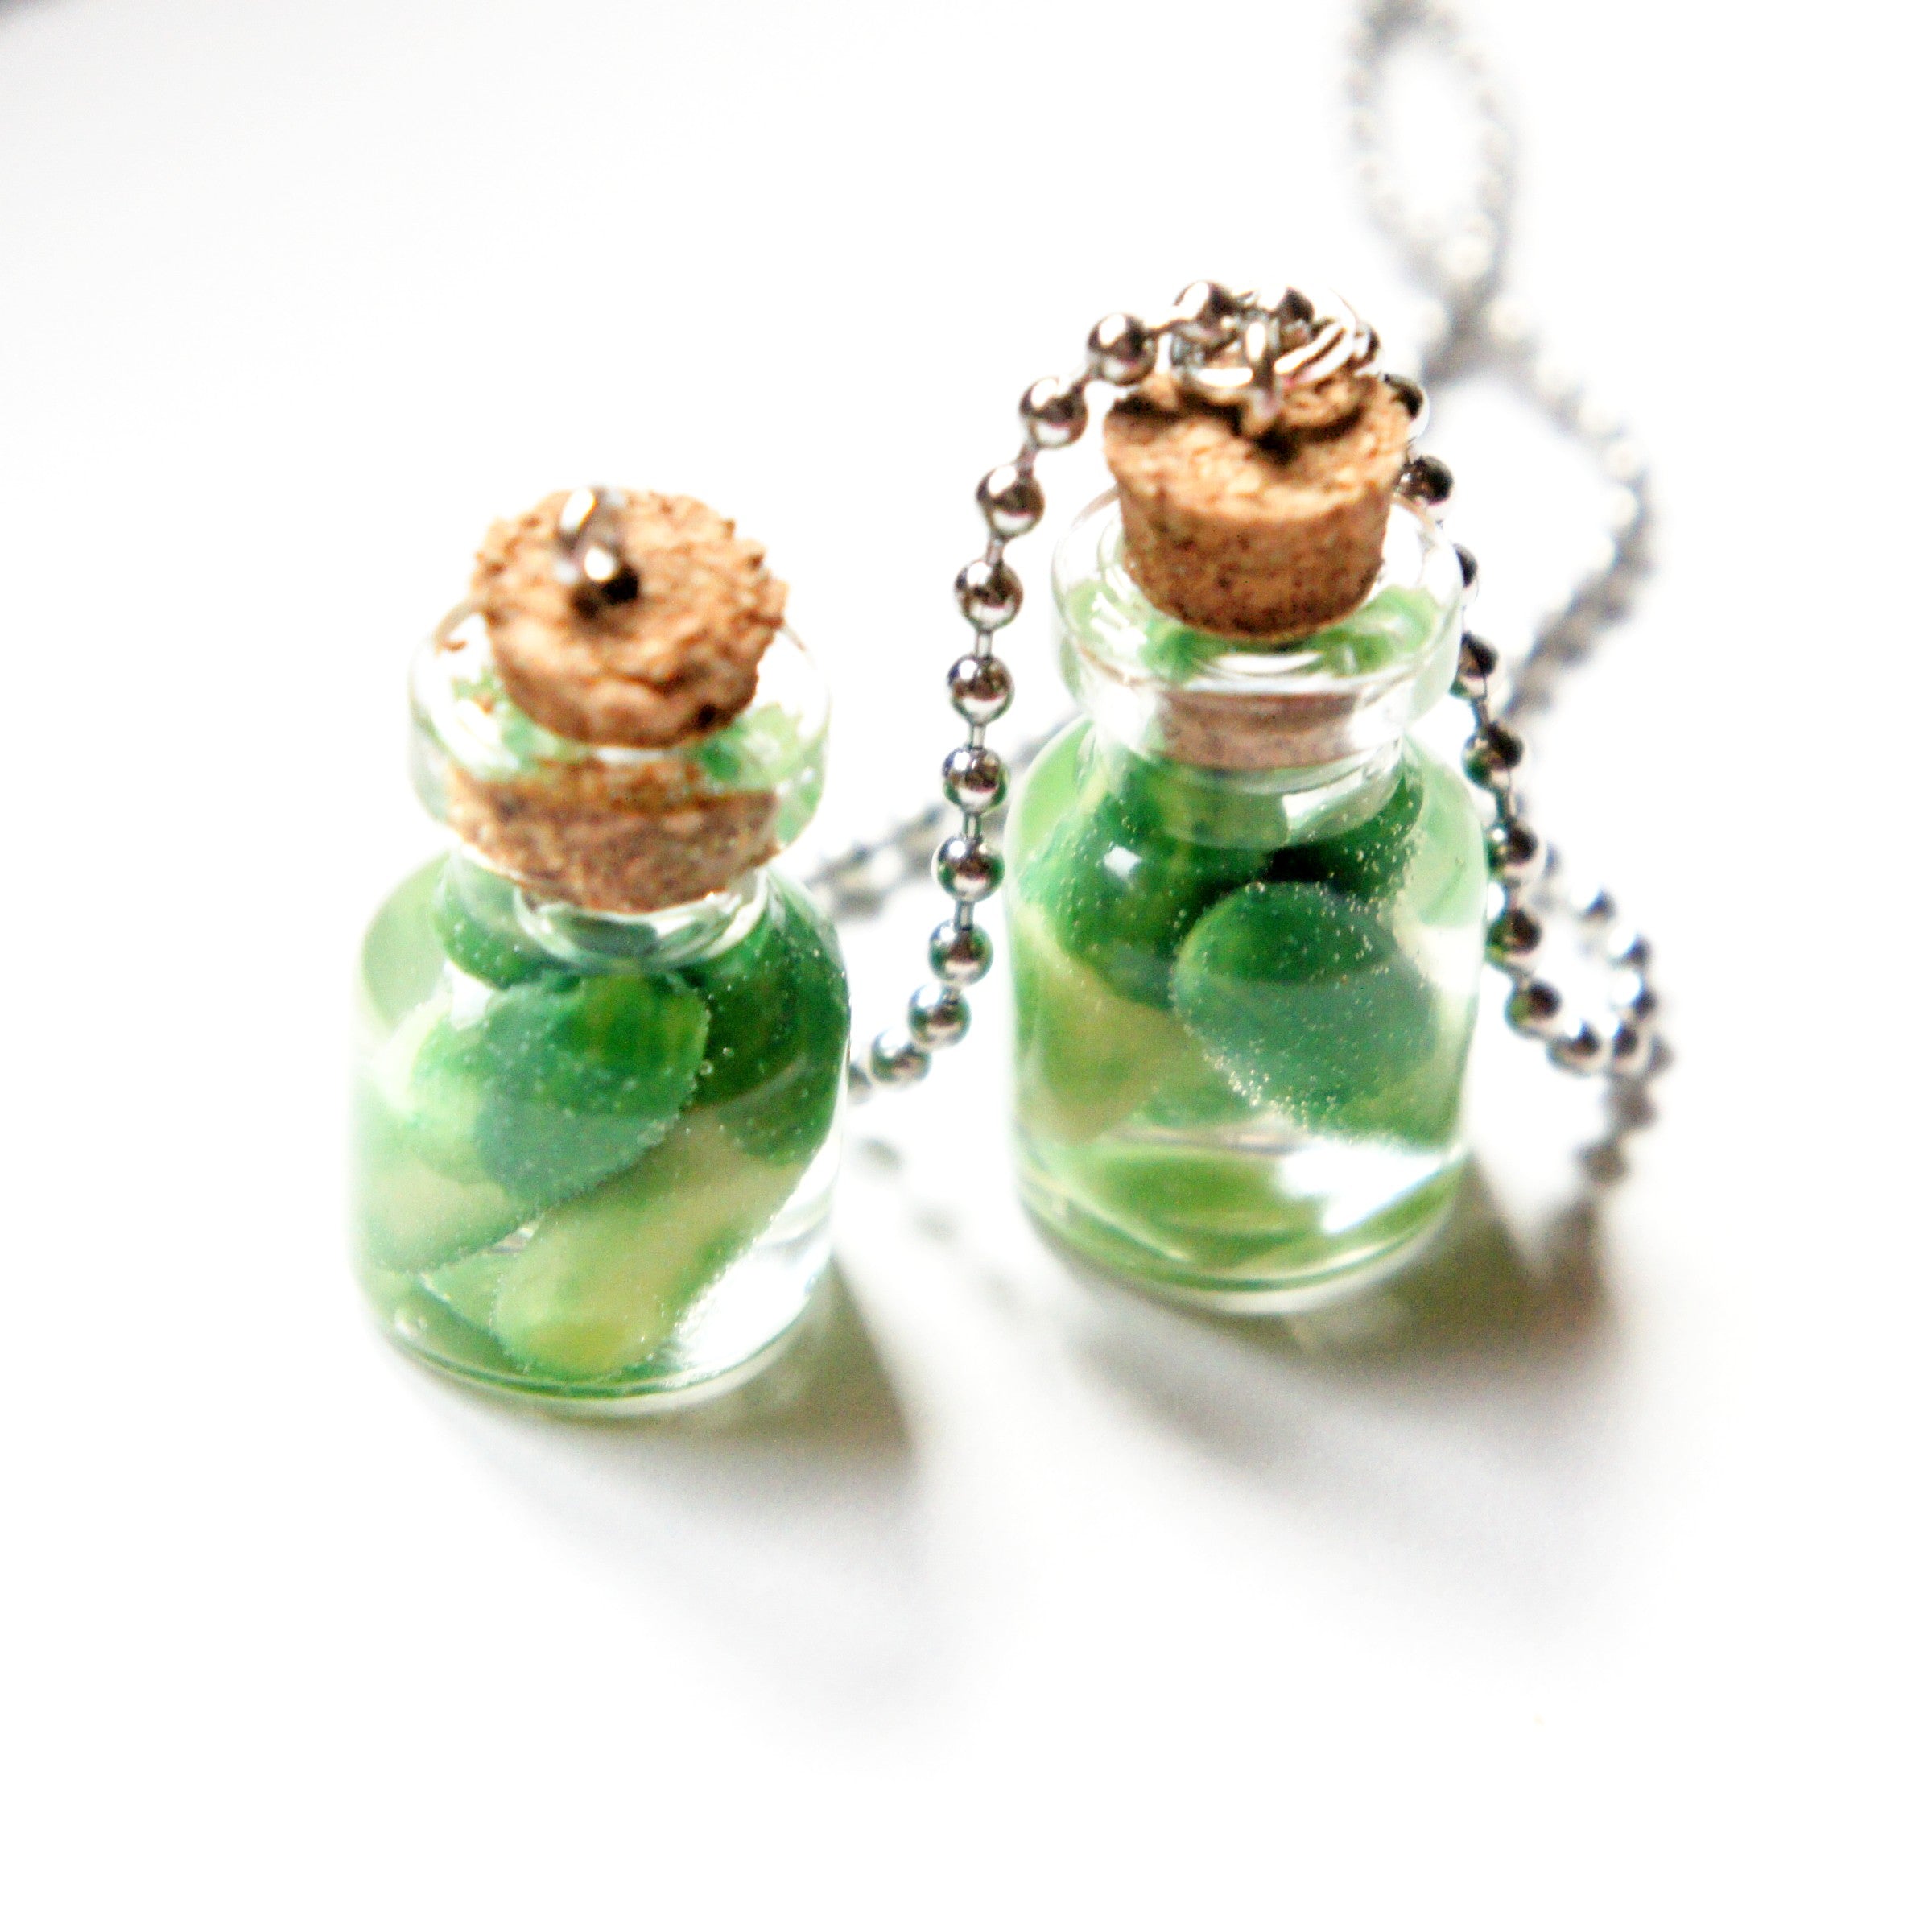 Pickles in a Jar Necklace - Jillicious charms and accessories